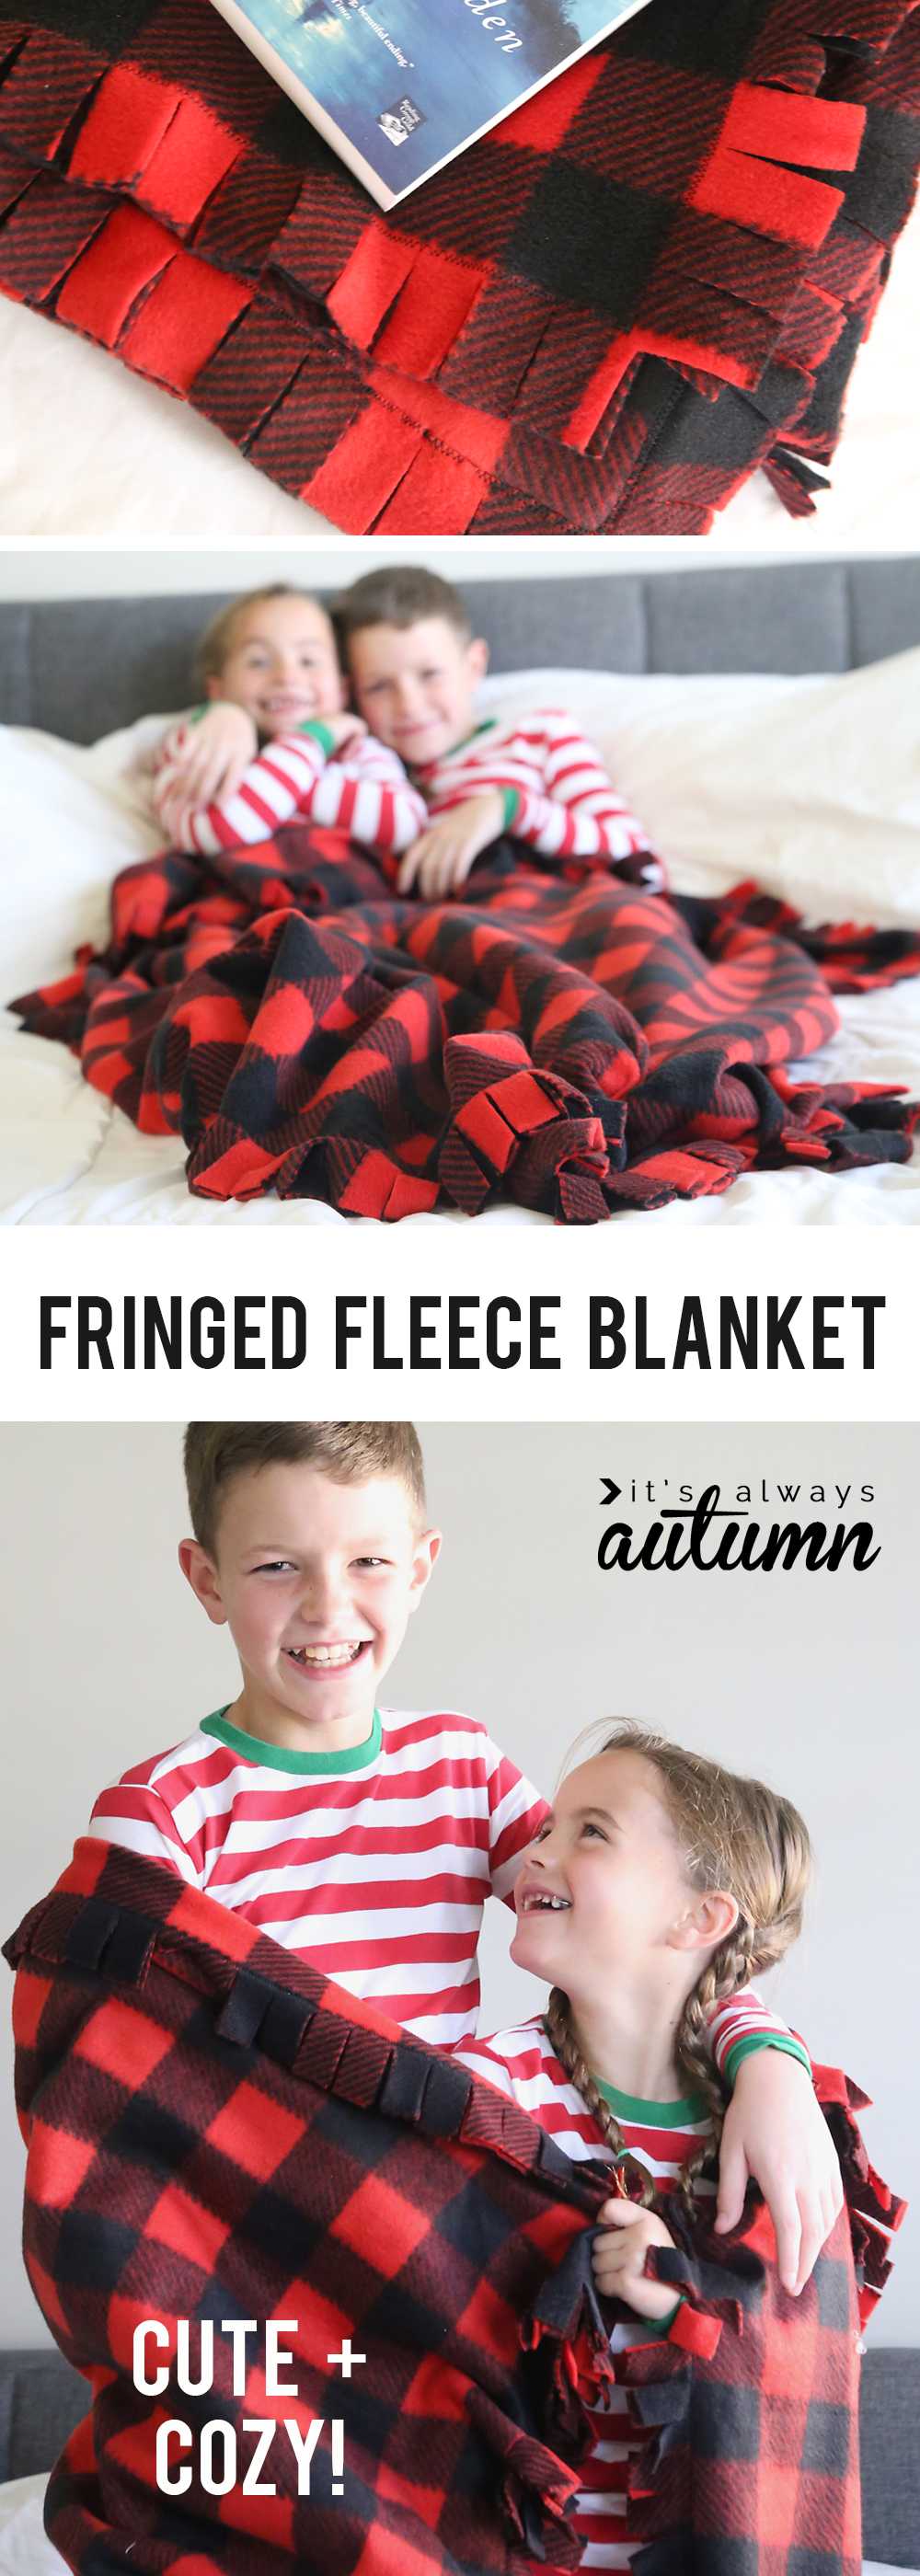 Boy and girl wrapped up in a fringed fleece blanket